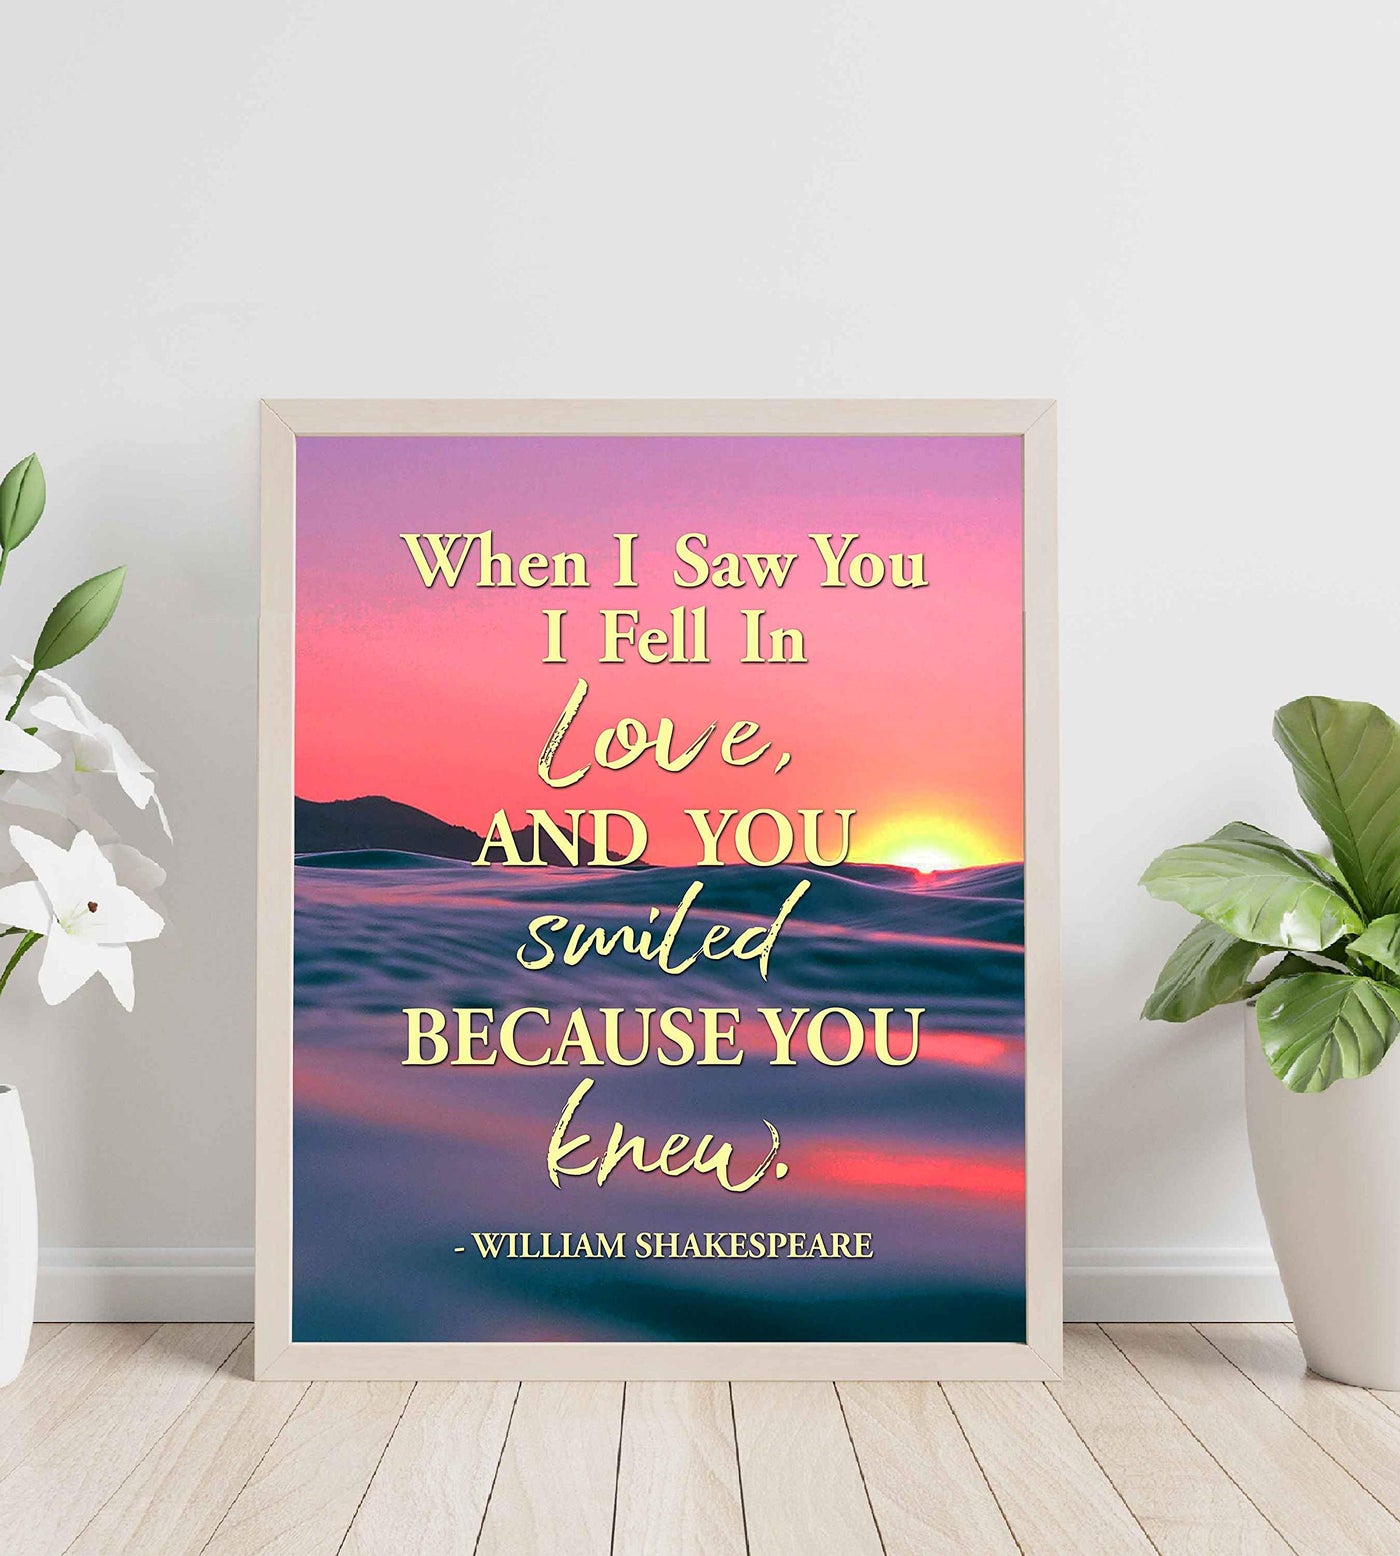 Shakespeare Quotes-"When I Saw You I Fell In Love"-Literary Wall Art Sign. 8 x 10" Romantic Ocean Sunset Poster Print-Ready to Frame. Inspirational Home-Bedroom-Office Decor. Great Wedding Gift!